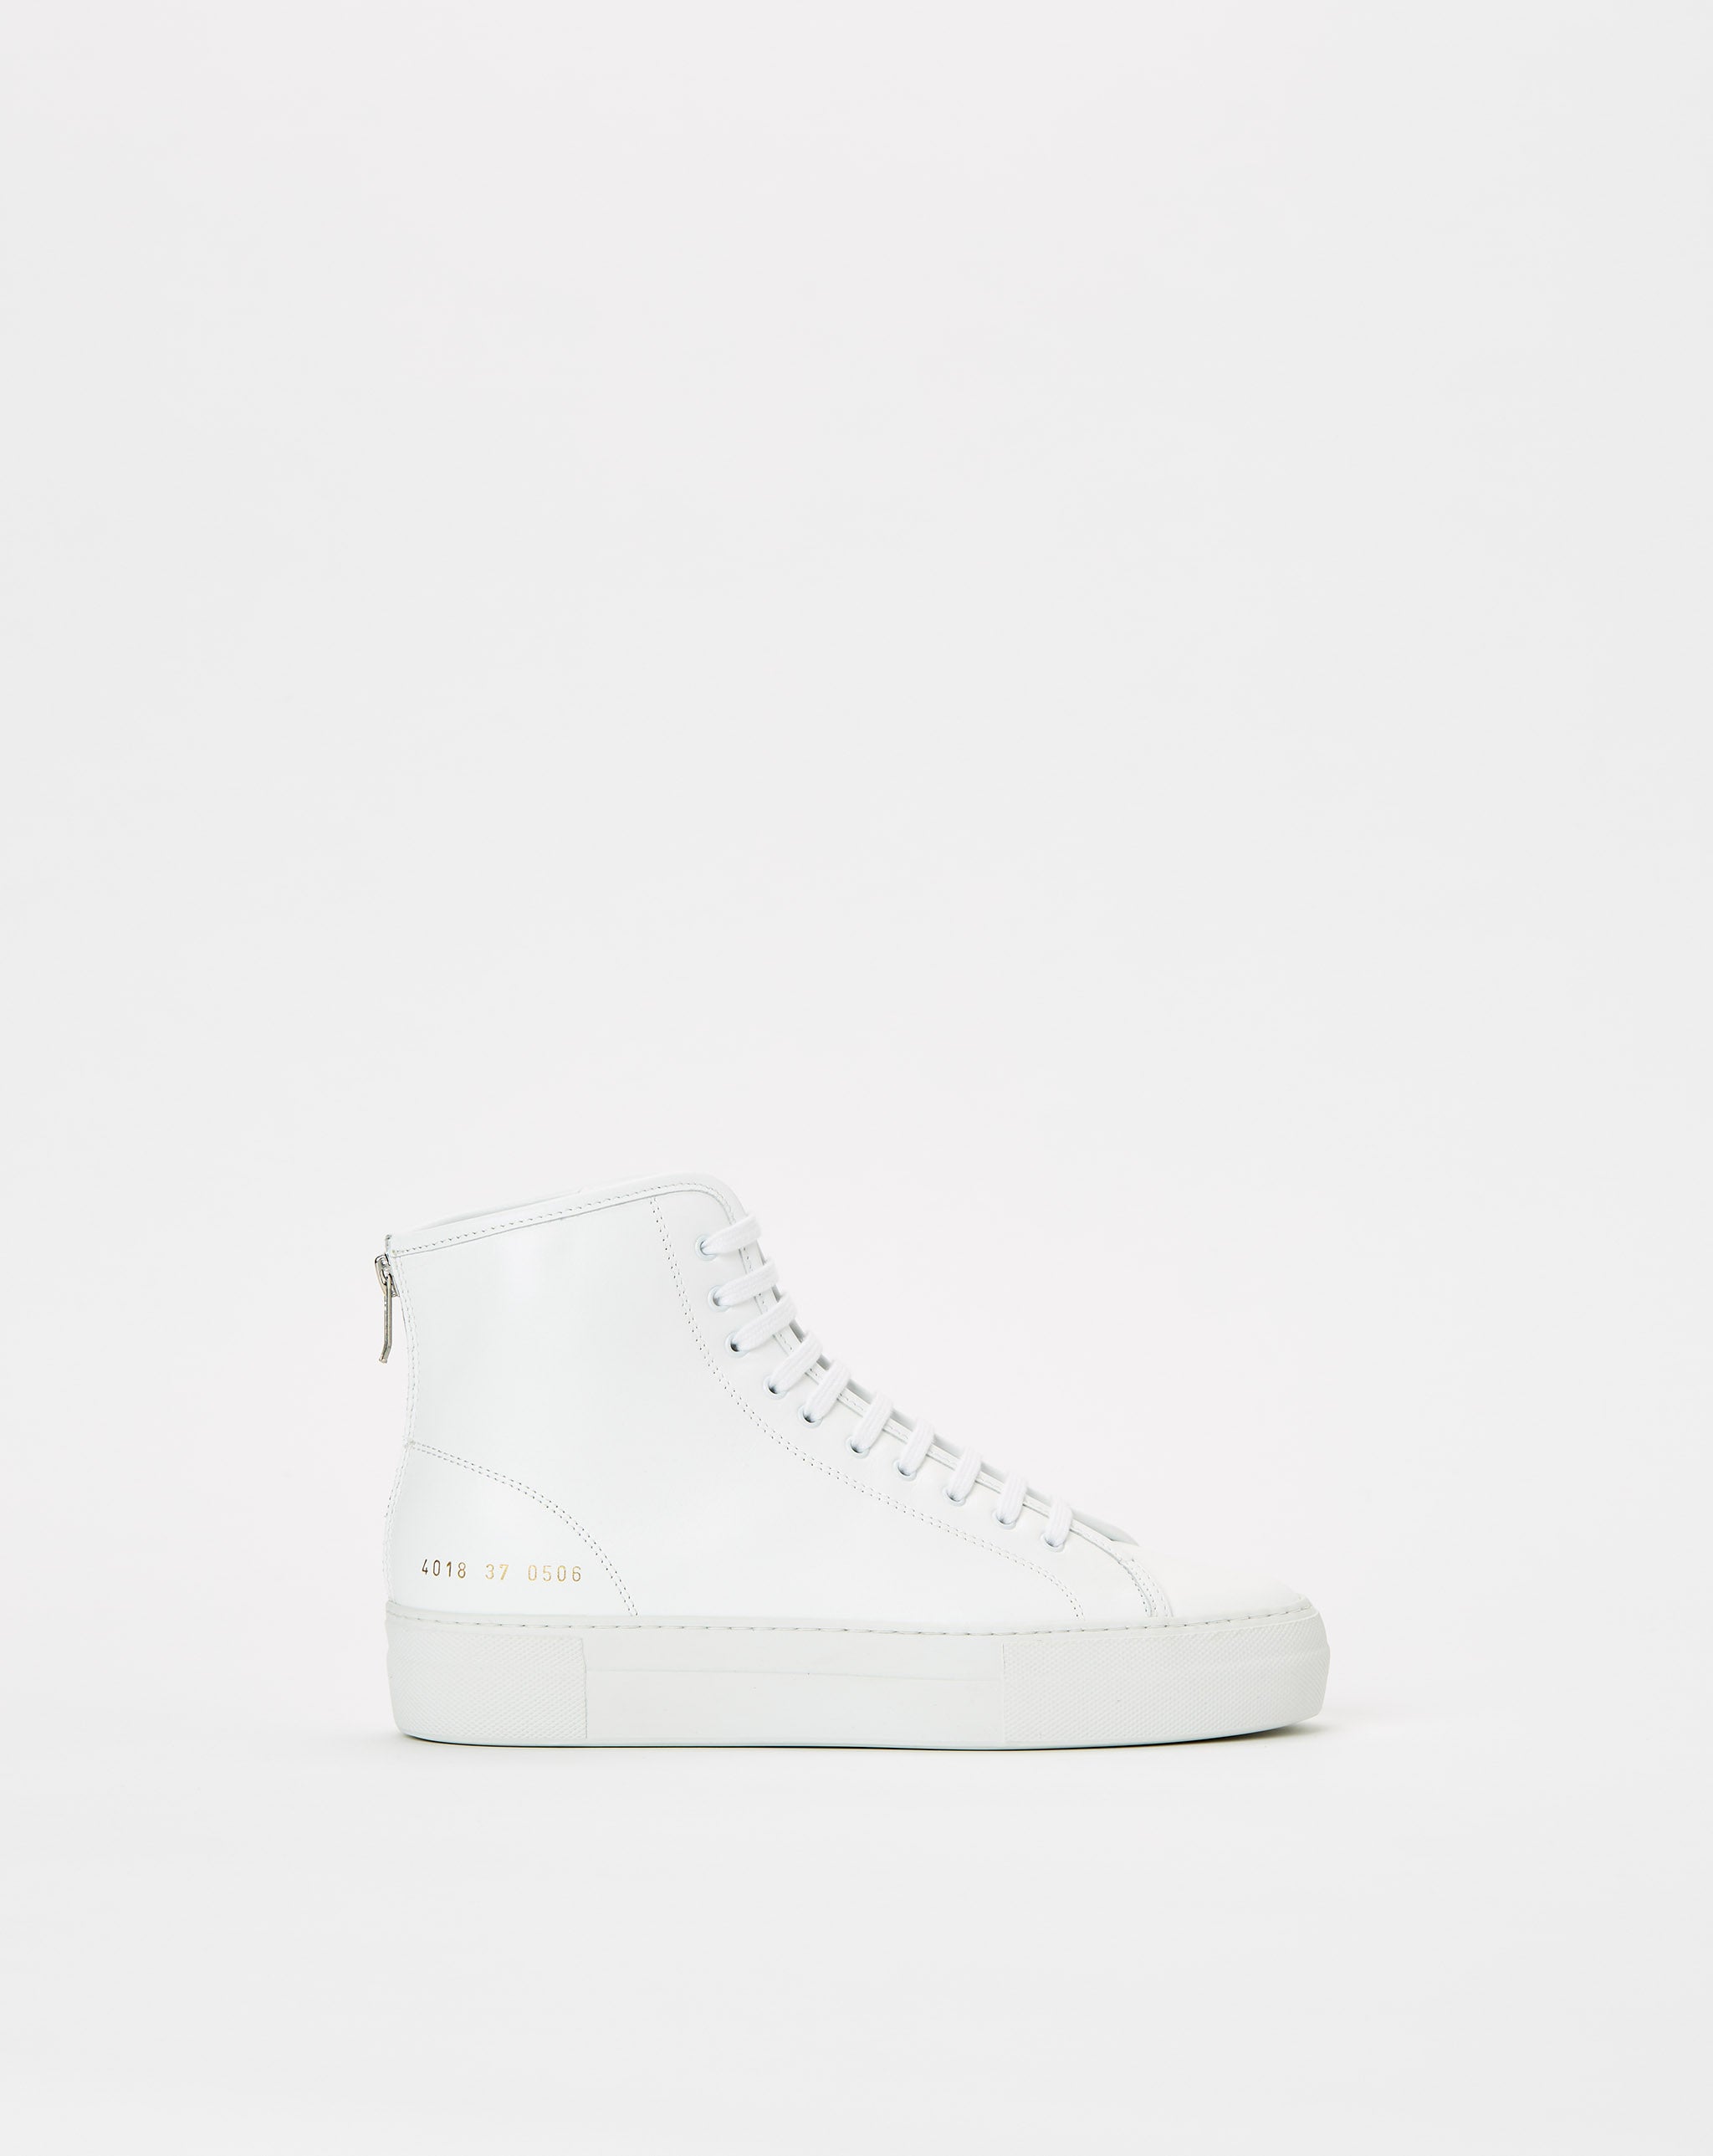 Common Projects Tournament High Super Leather  - XHIBITION